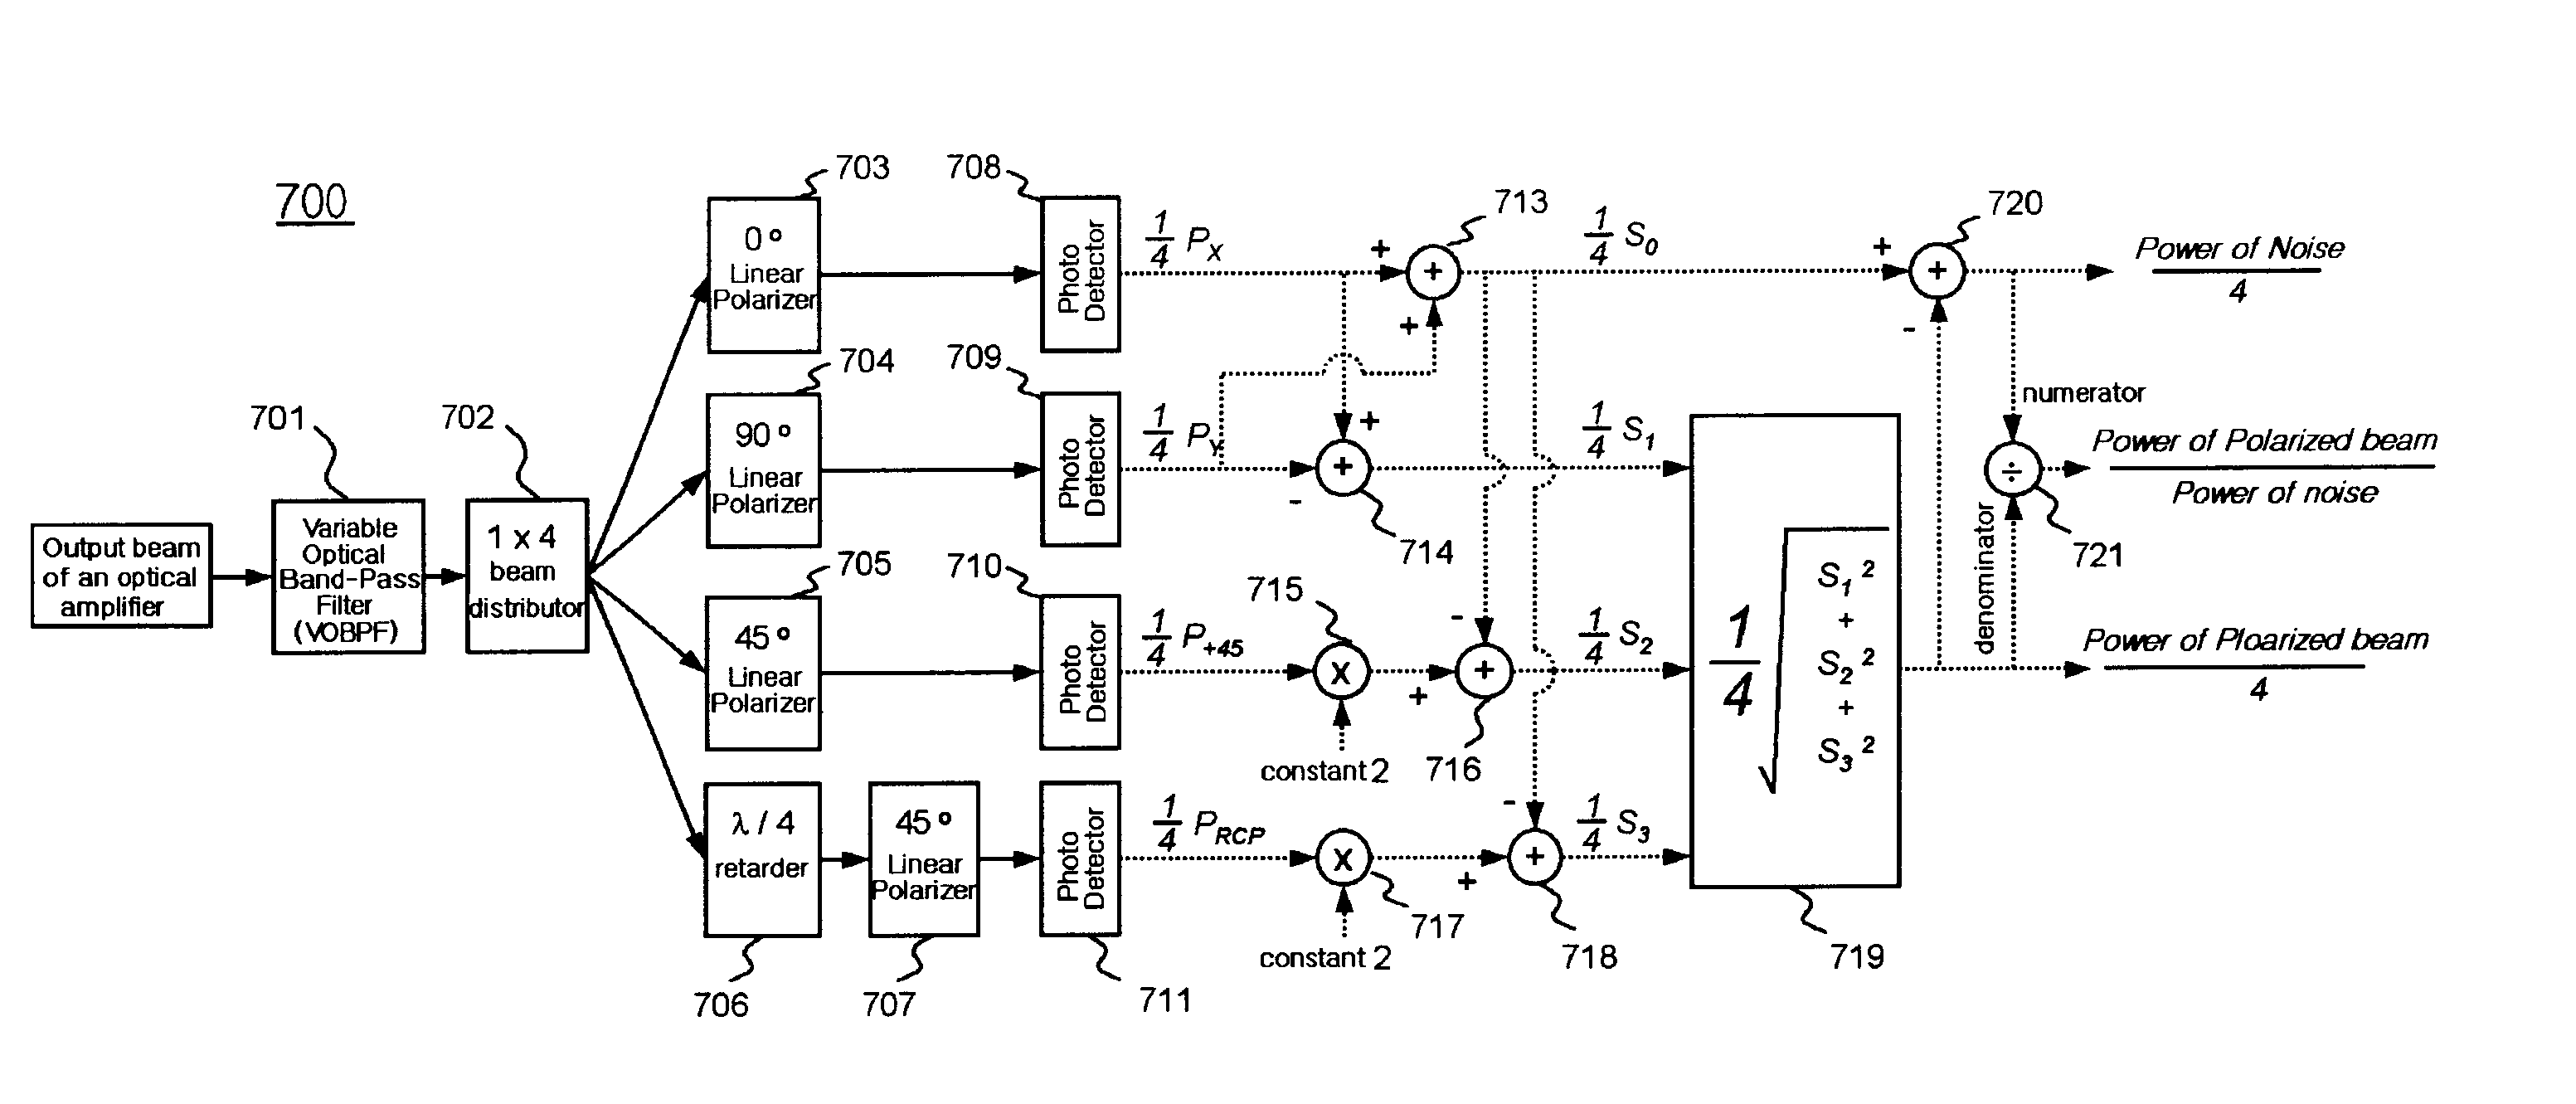 Apparatus and method for measuring optical signal-to-noise ratio